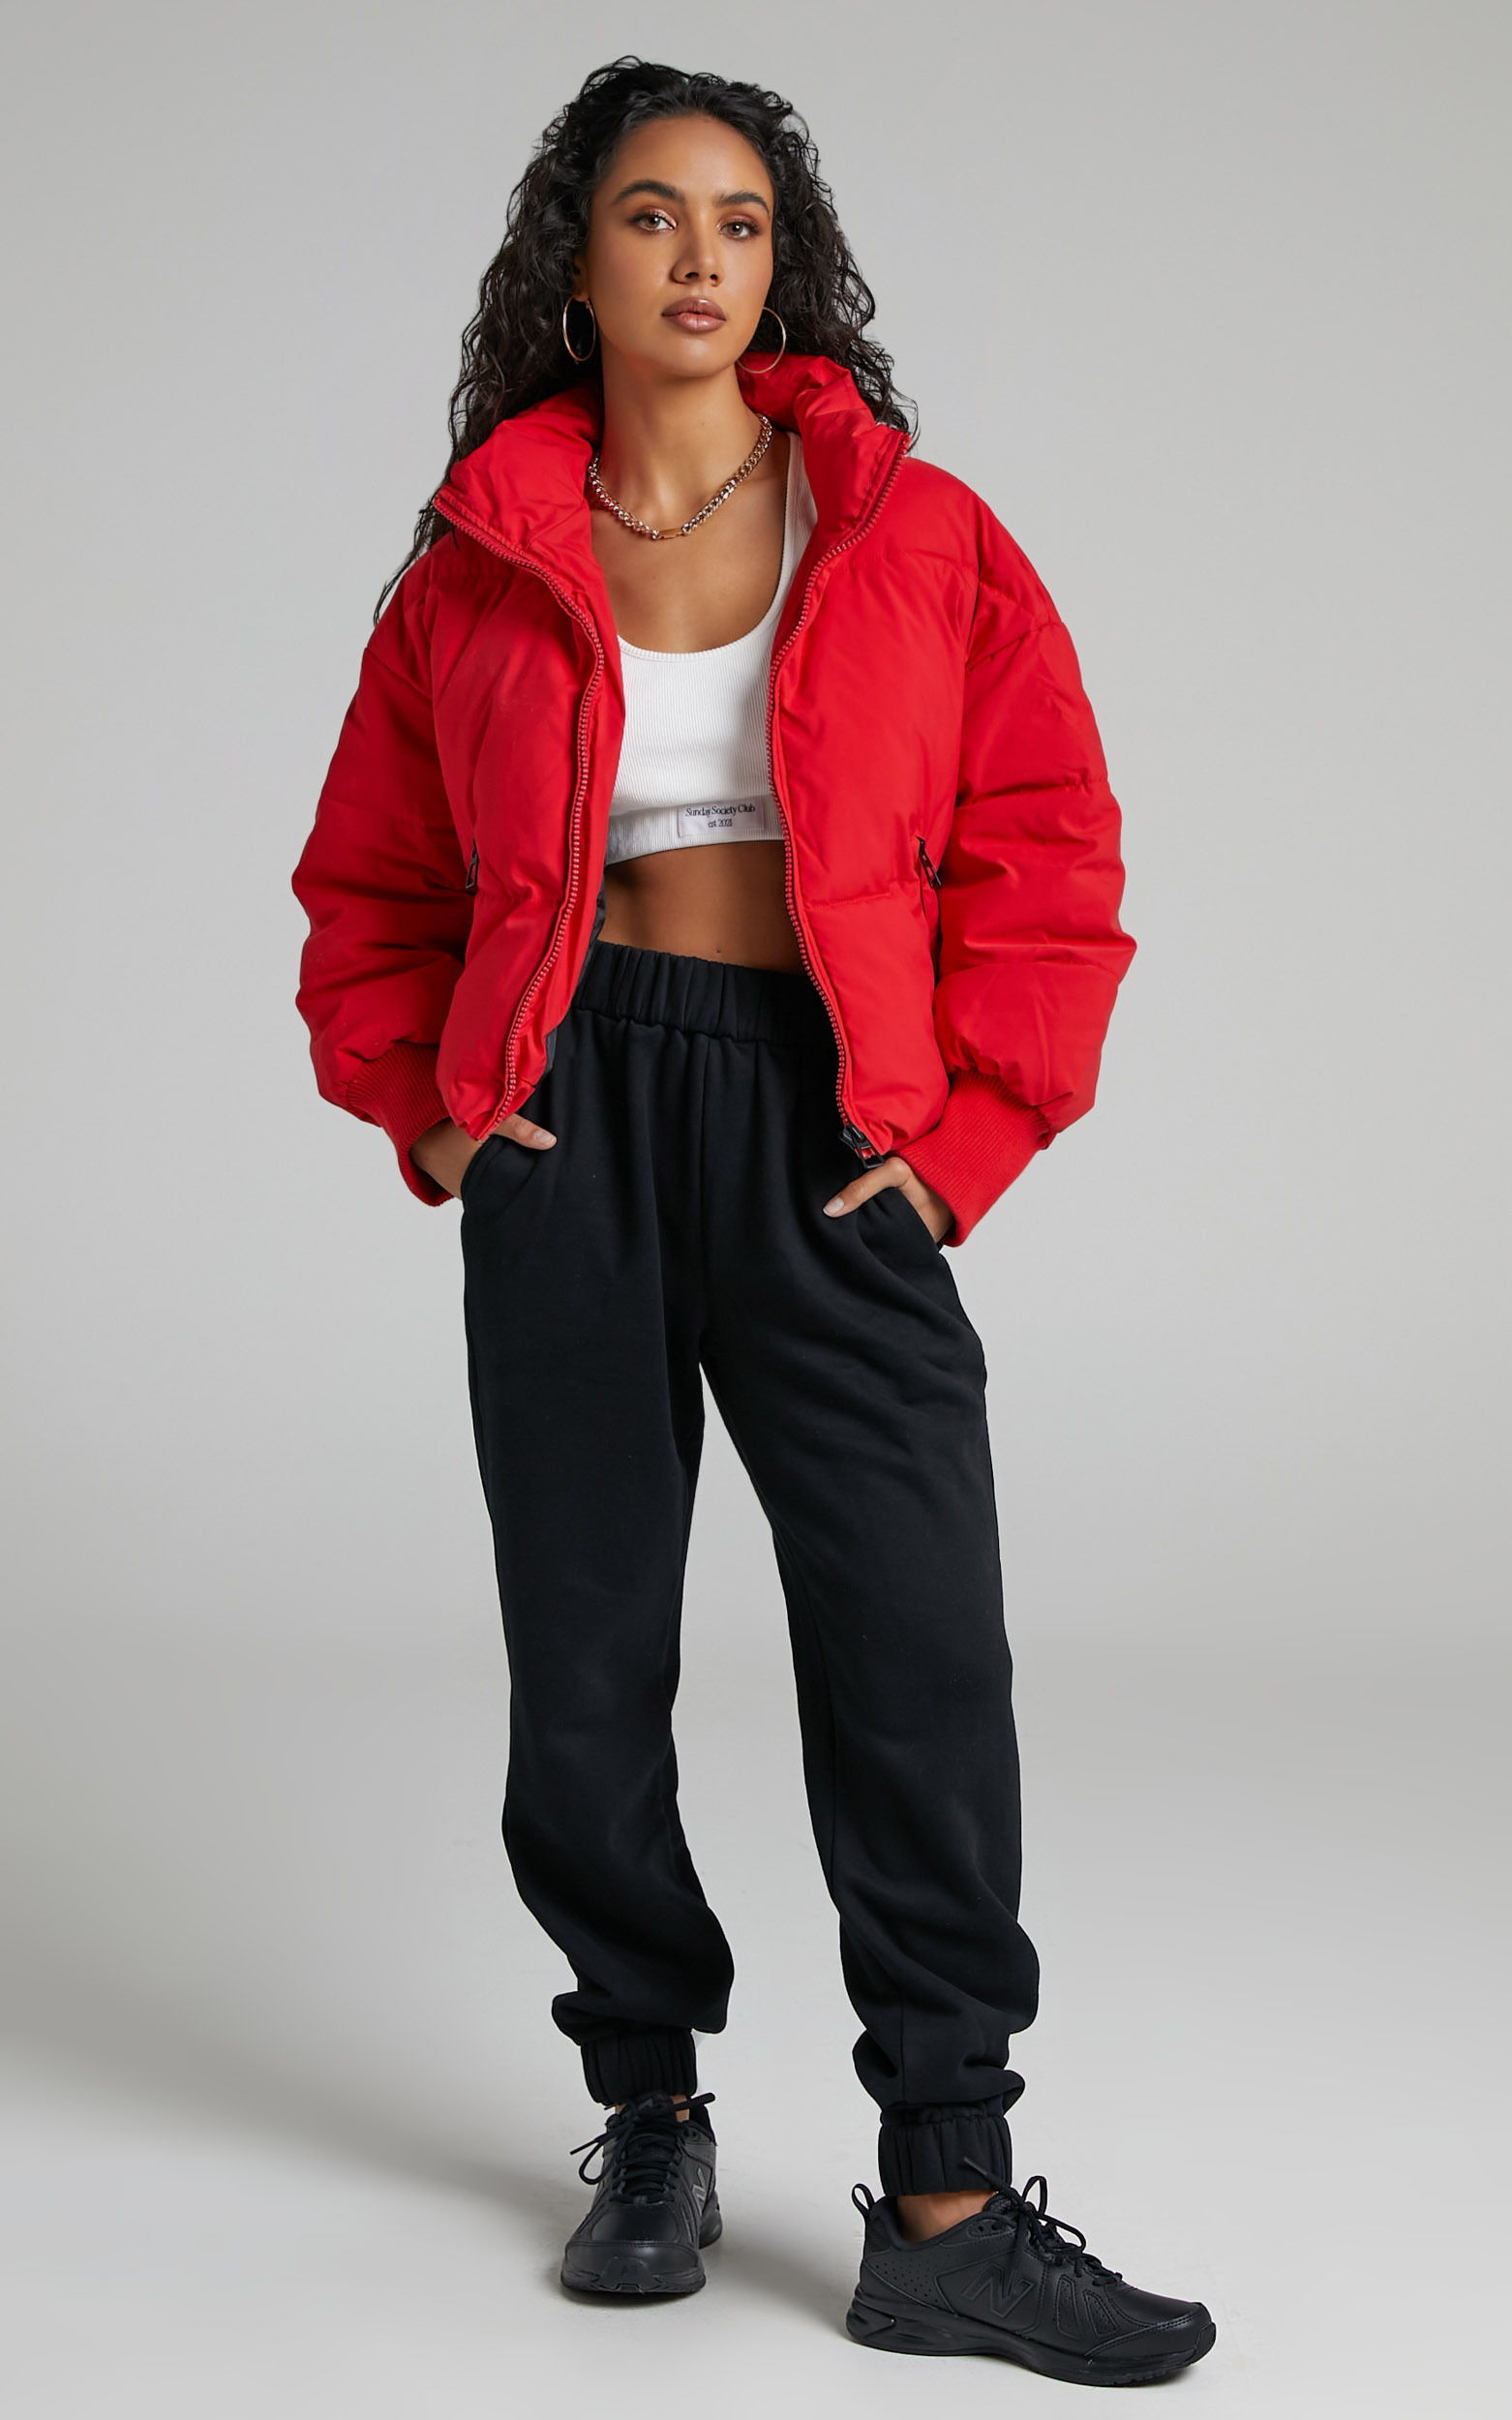 Windsor Puffer Jacket in Red - 06, RED6, hi-res image number null